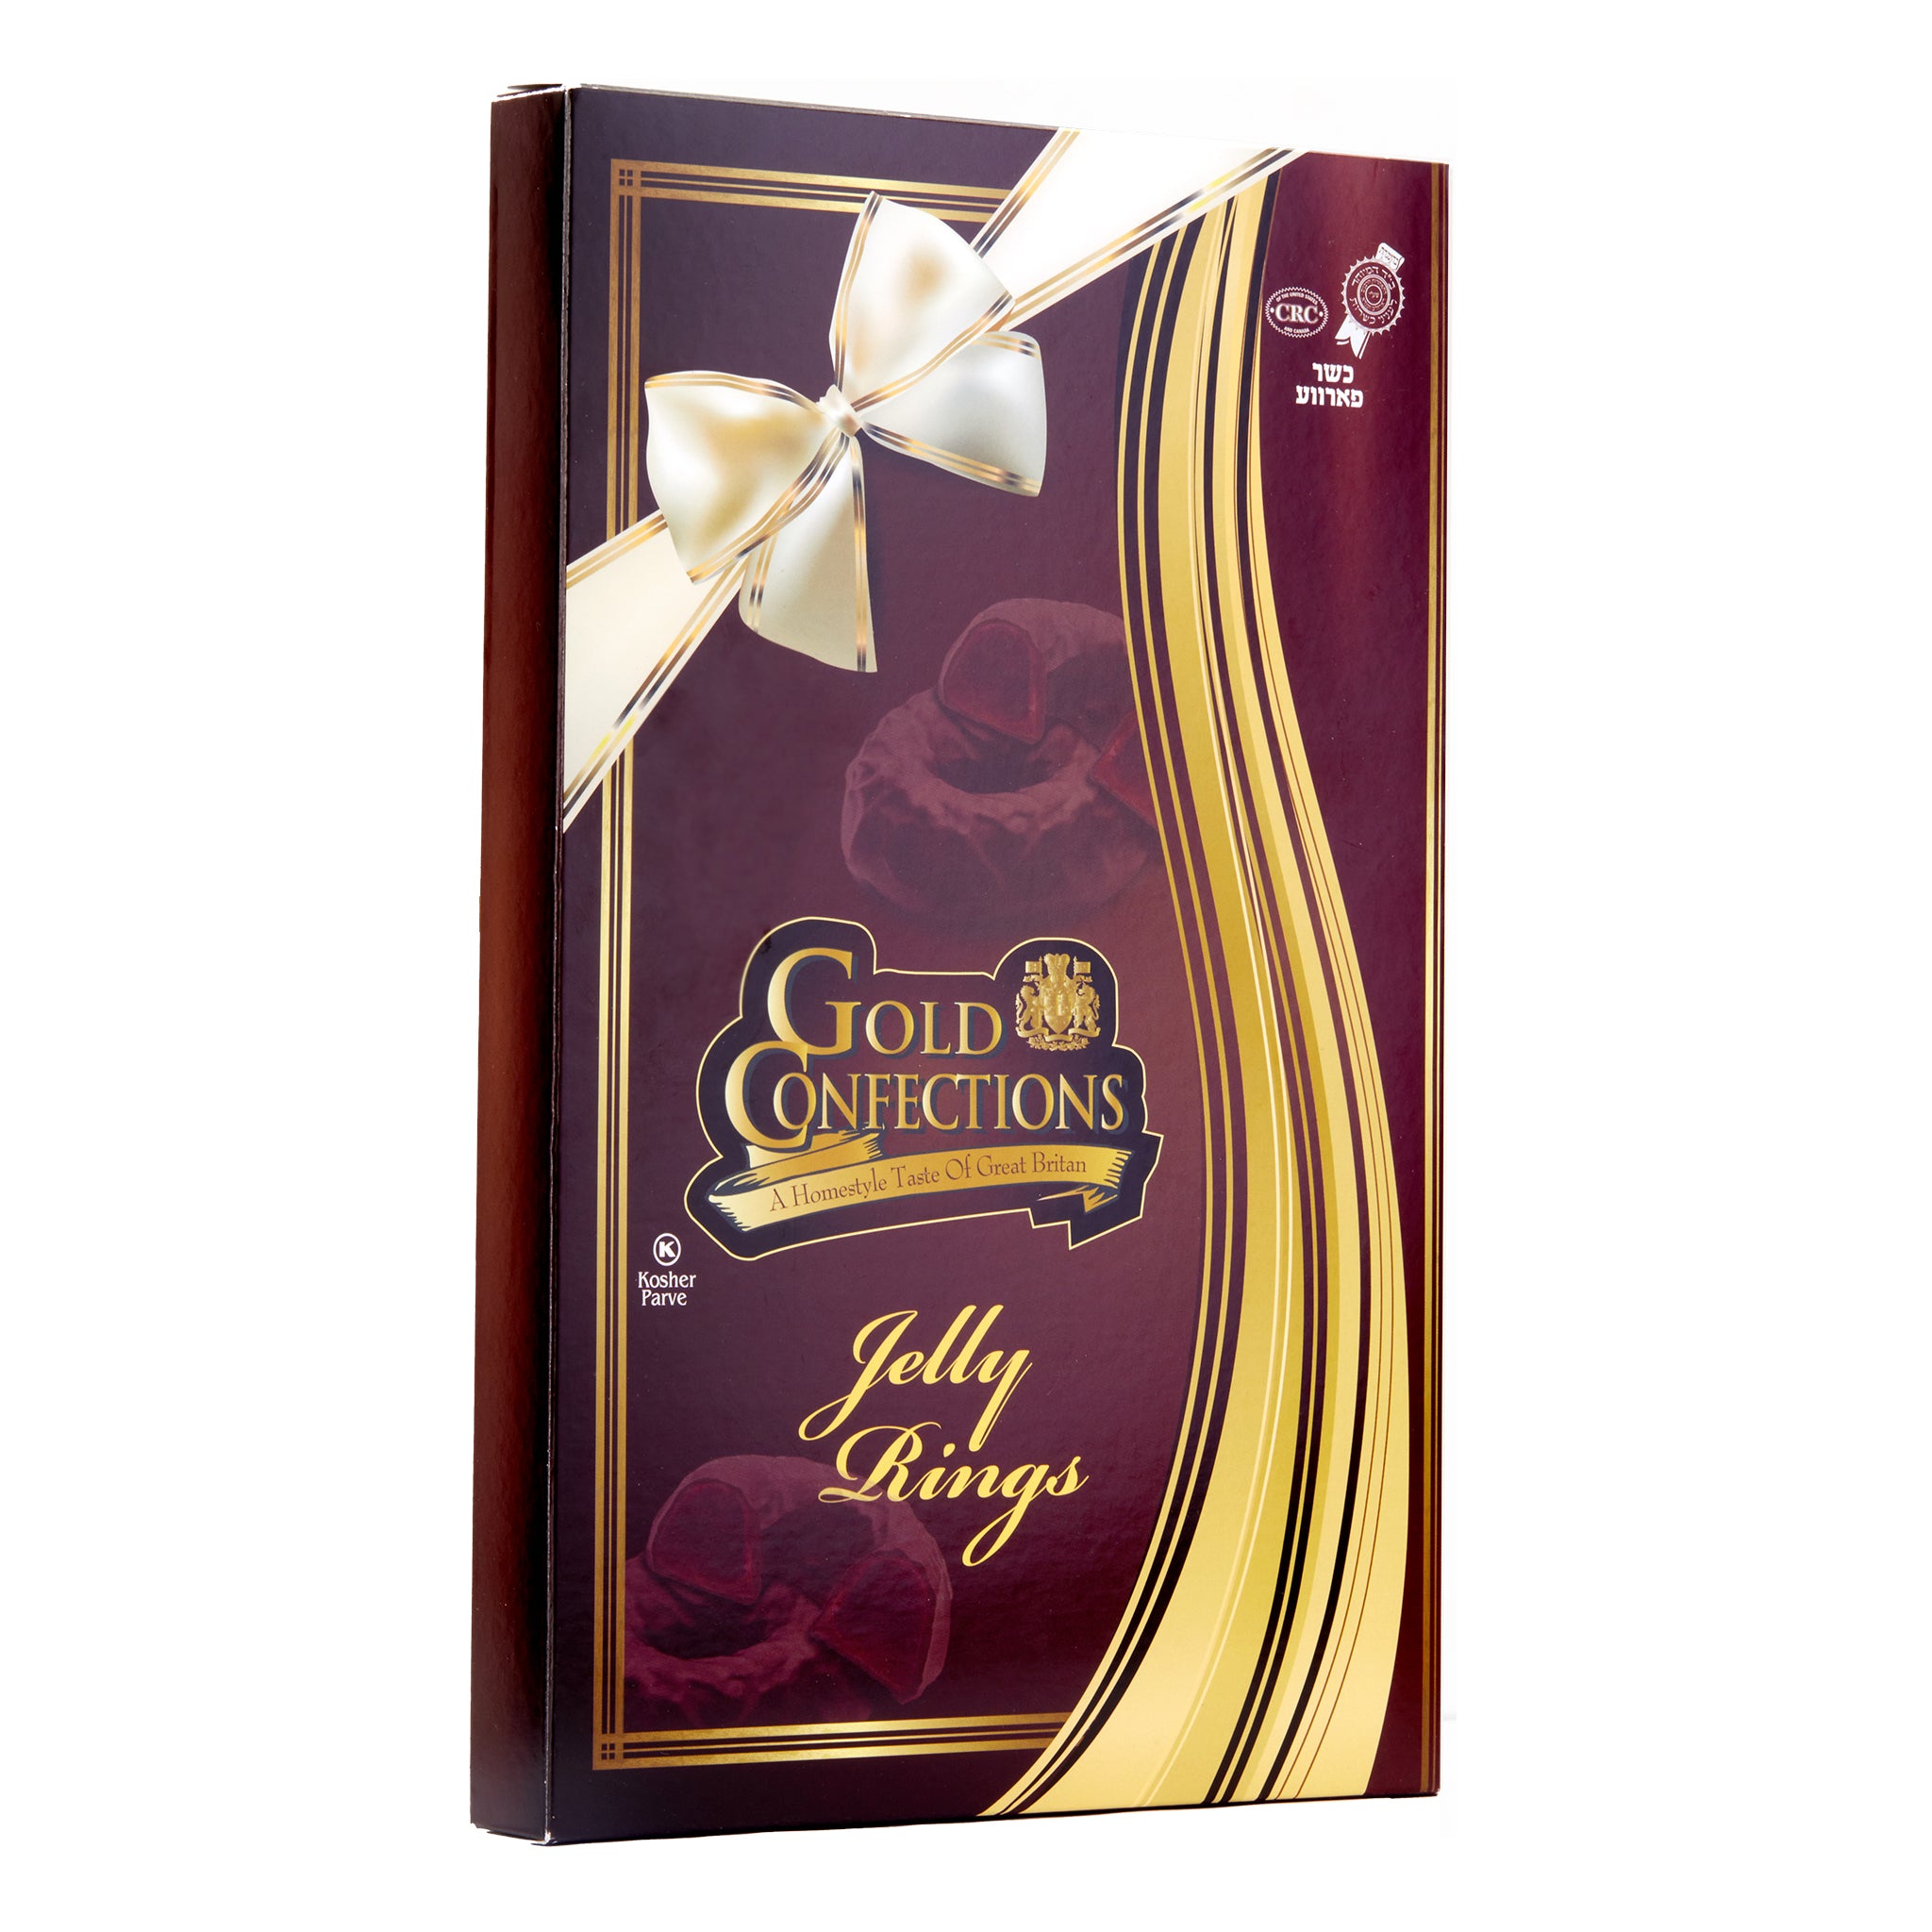 Deluxe Box - Gold Confections Jelly Rings 12 per case